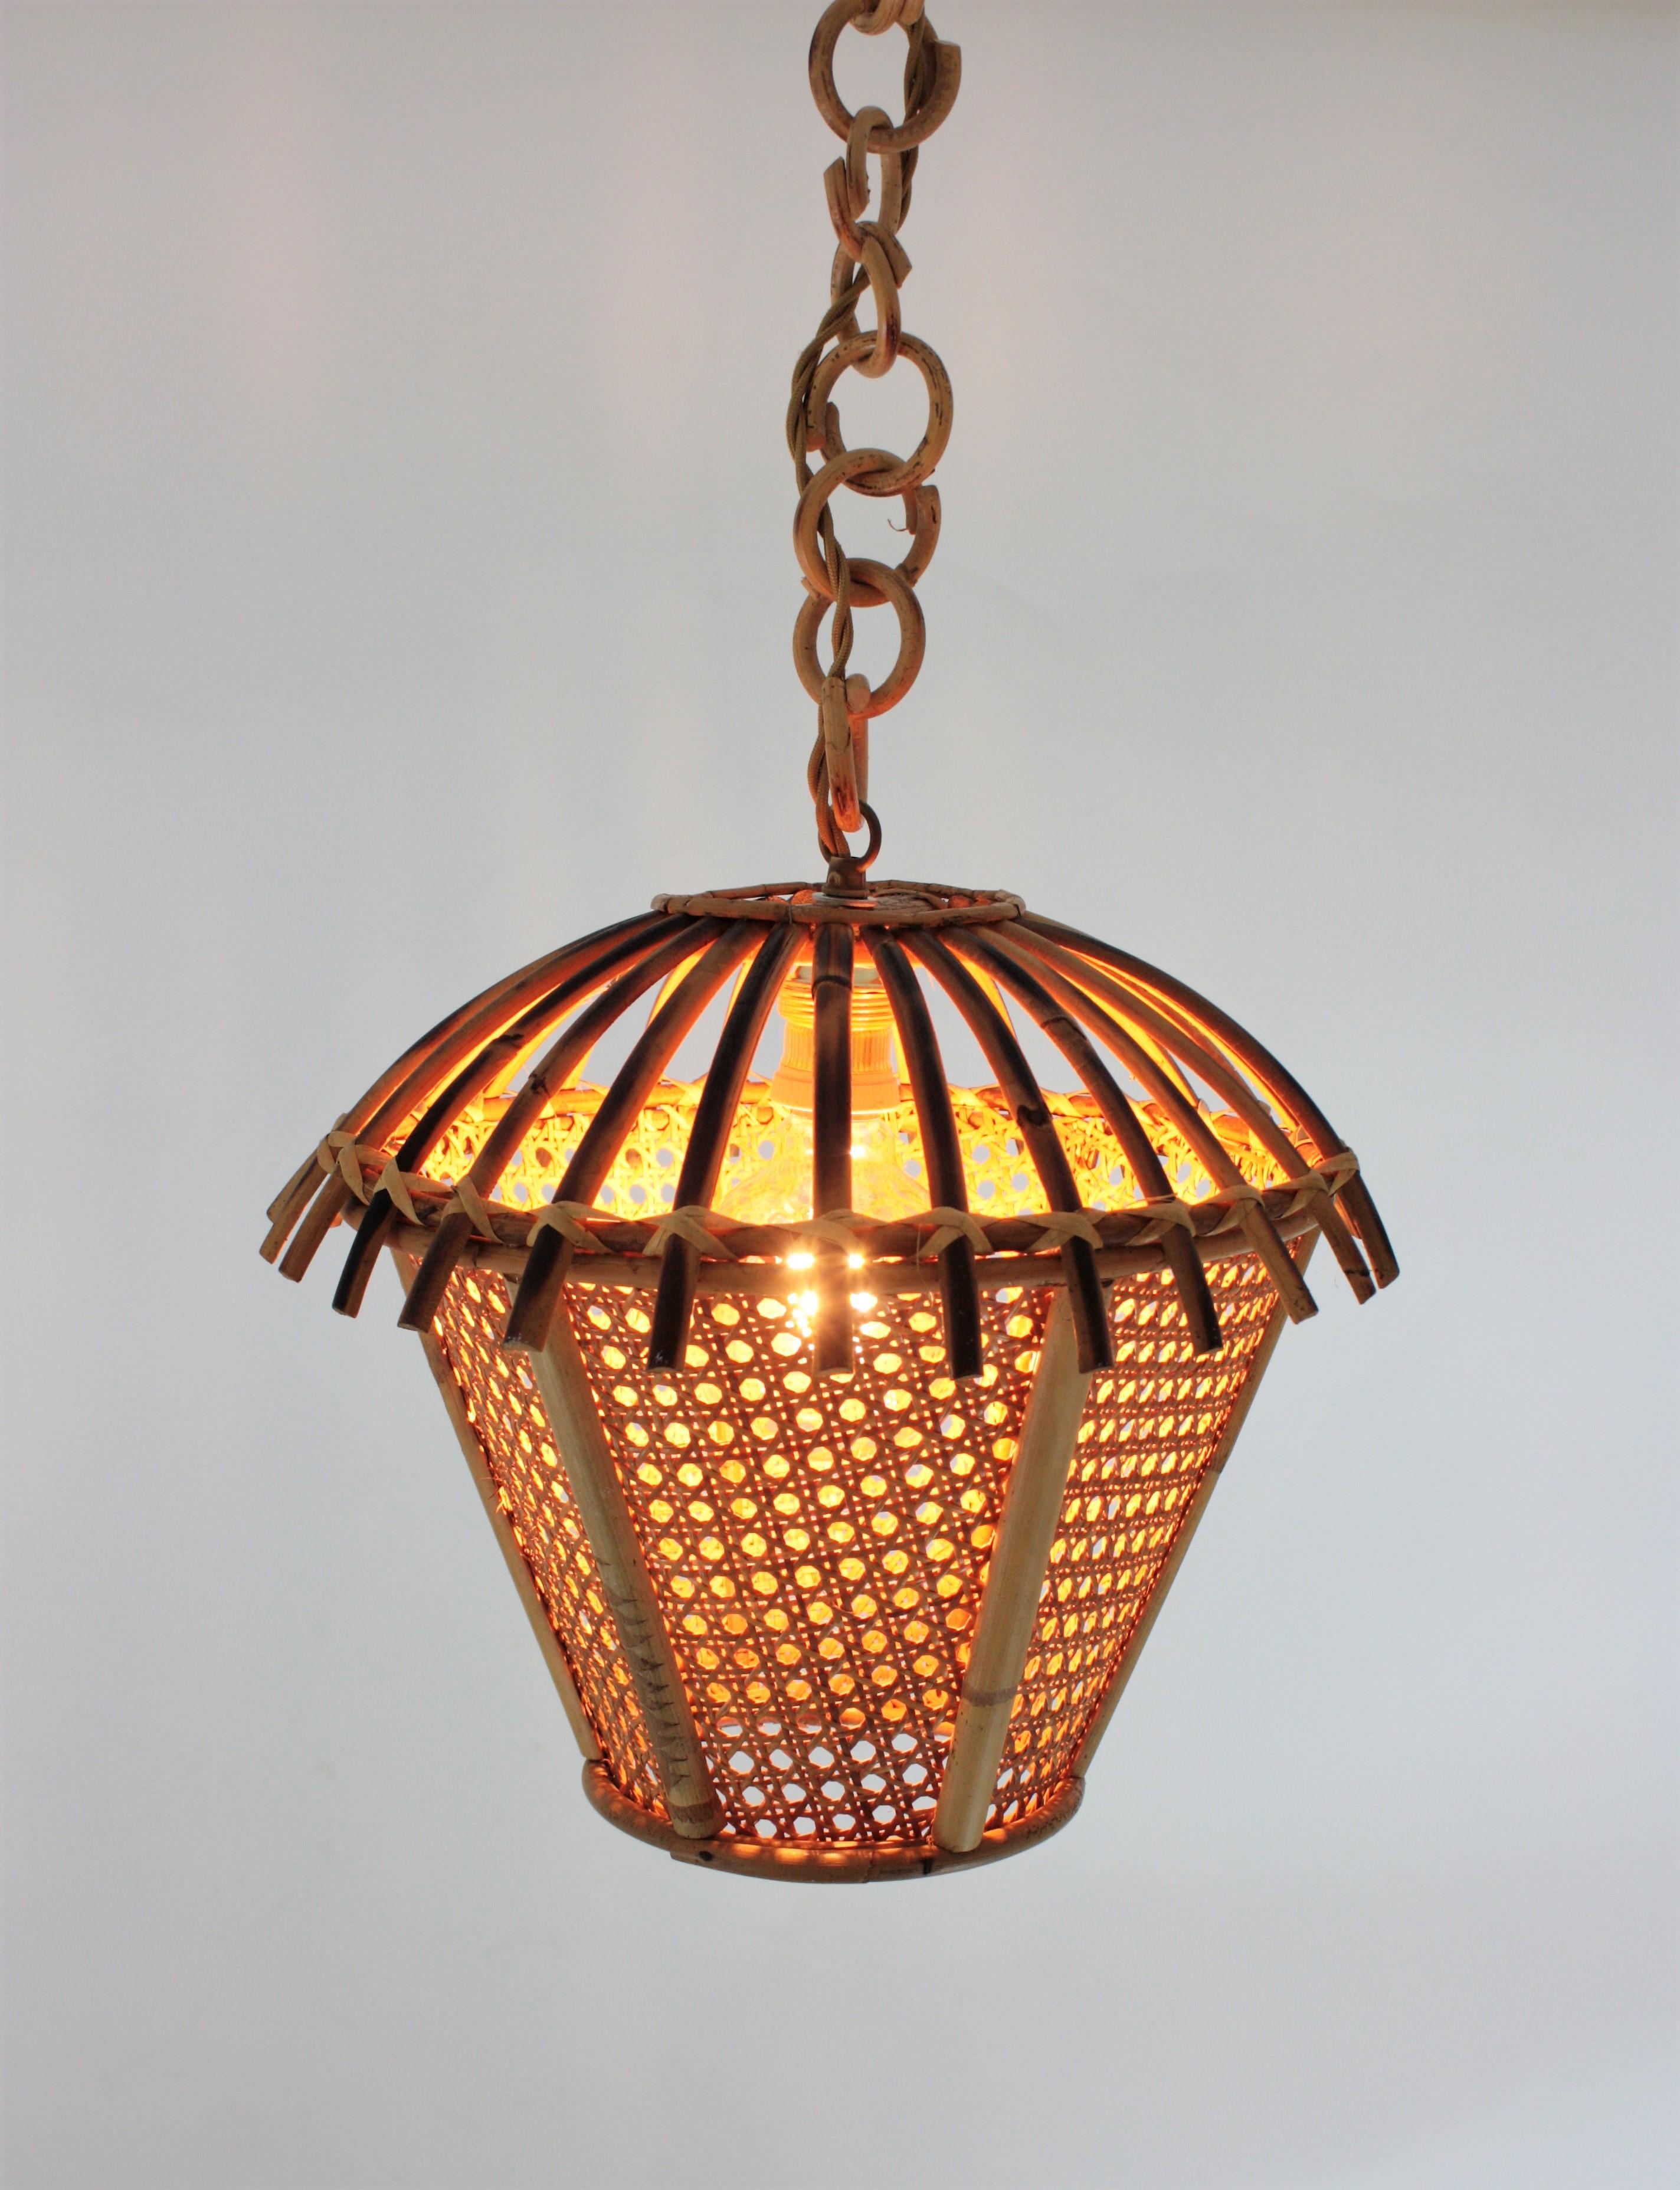 Italian Modernist Rattan and Wicker Wire Pagoda Pendant Hanging Light, 1960s For Sale 9